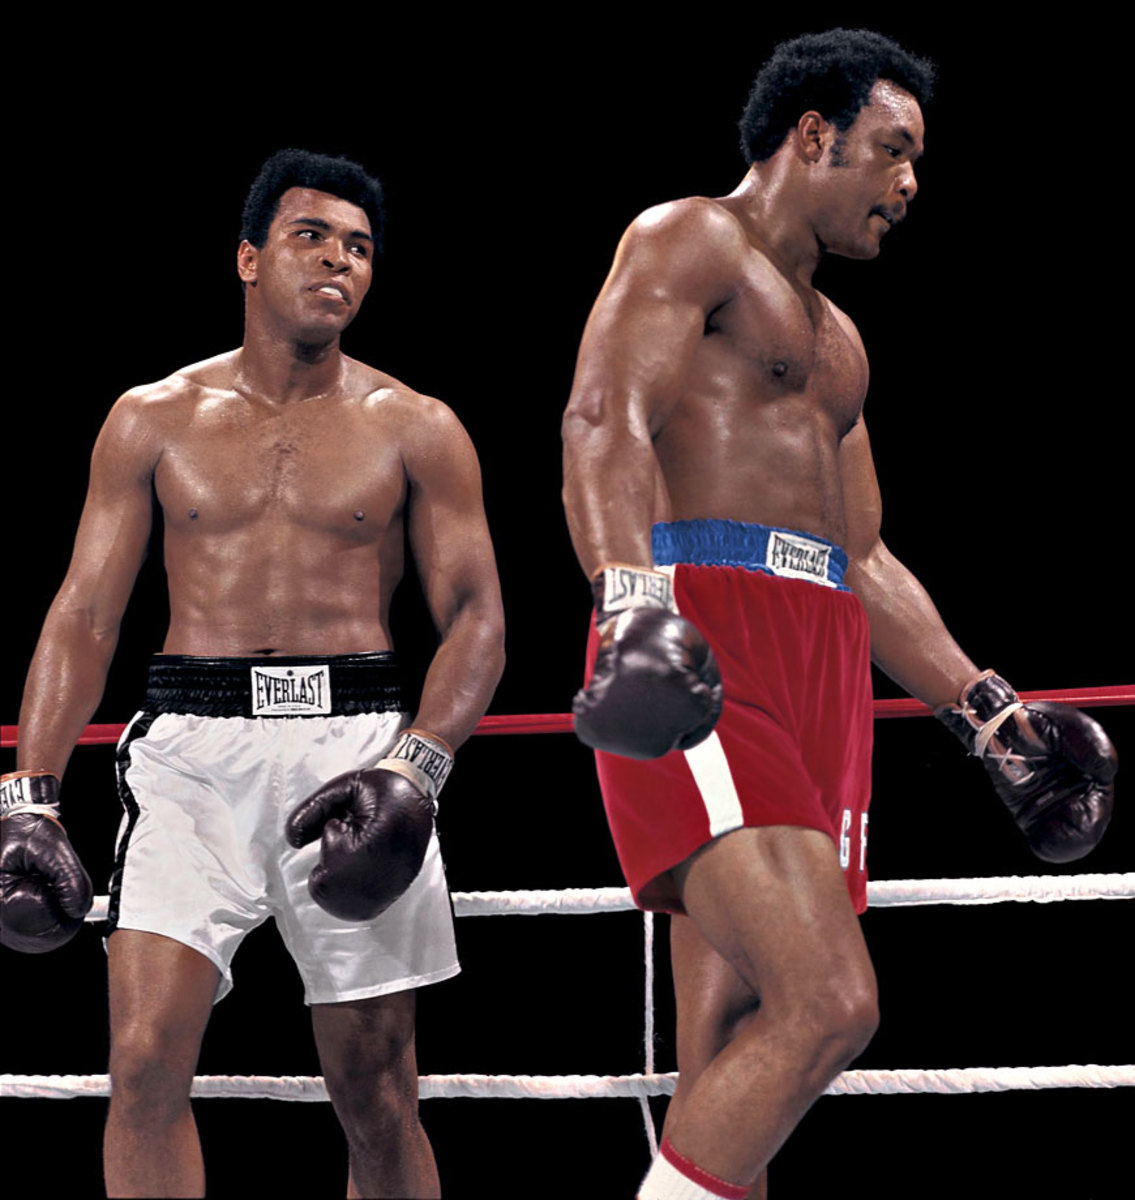 1974 BOXING MUHAMMAD ALI vs GEORGE FOREMAN RUMBLE IN THE JUNGLE 8x10 PHOTO 